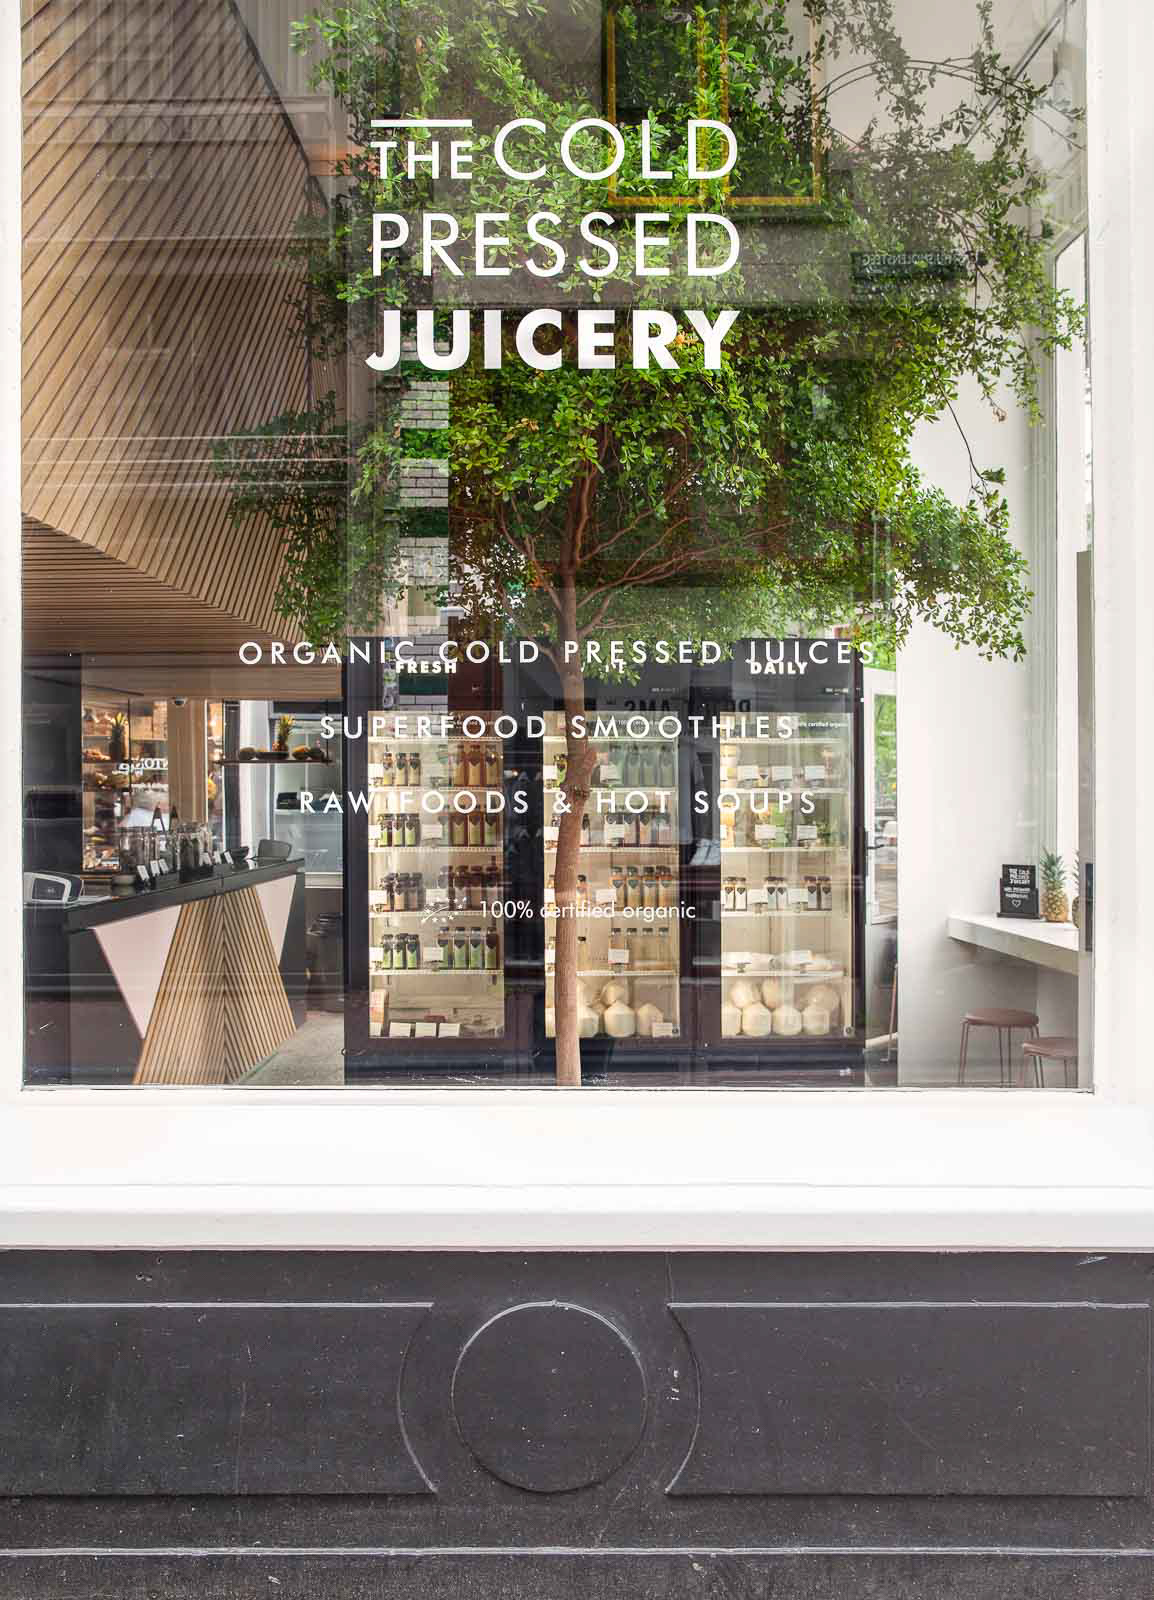 The Cold Pressed Juicery Nine Streets